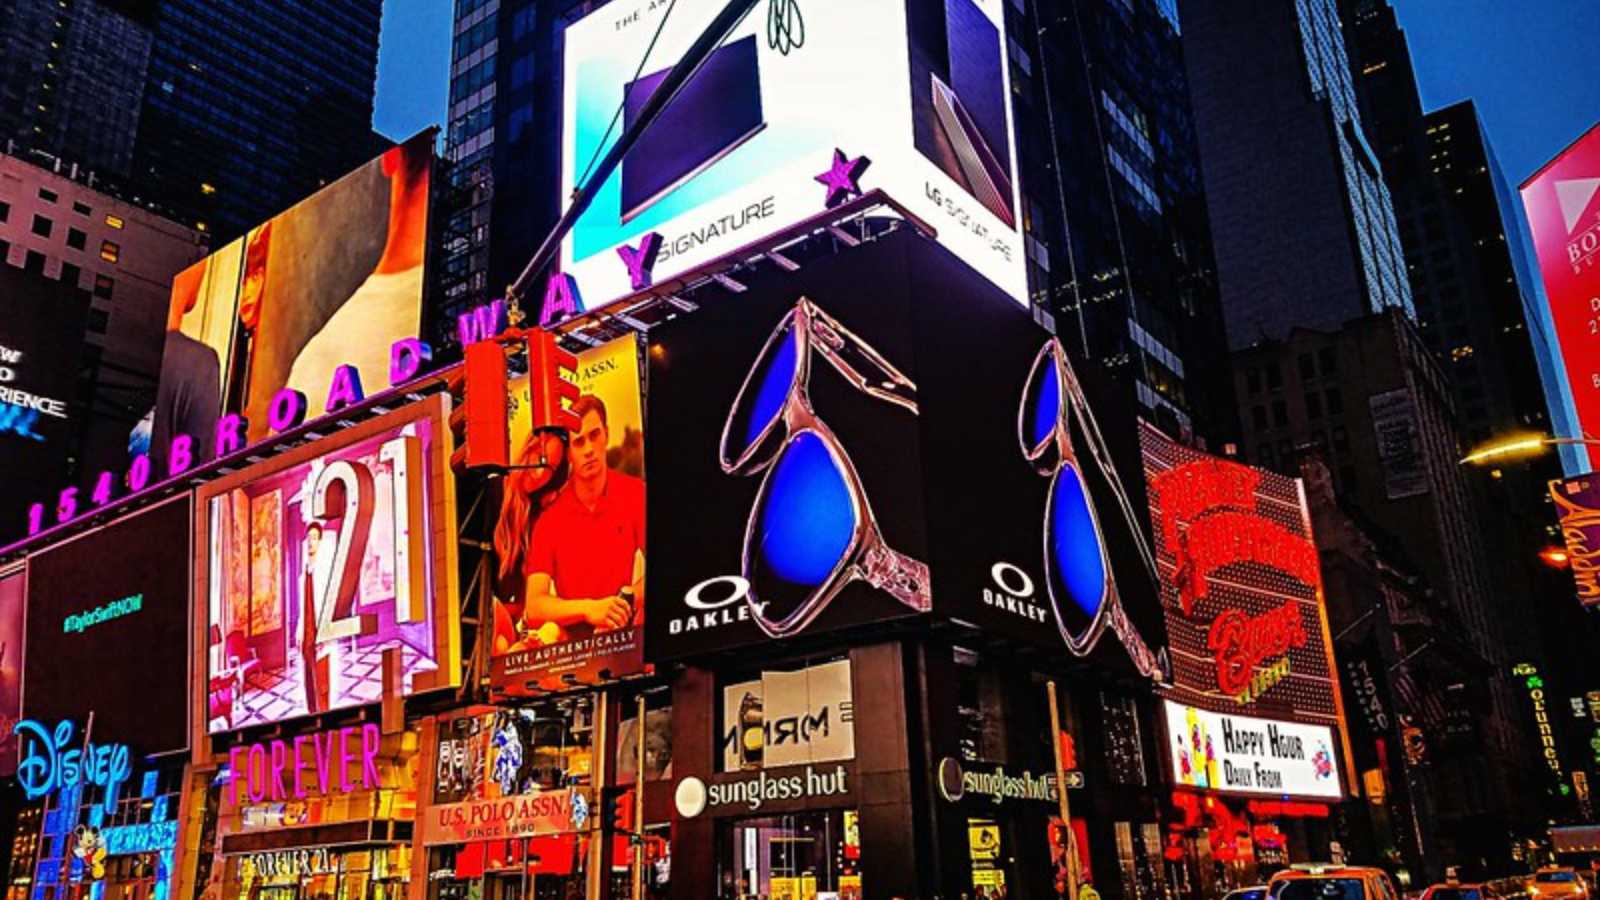 <p><span>Overcrowded and sensory-overloading, Times Square is America's glittering neon trap. It's filled with overpriced shops, aggressive street performers, and <a href="https://frenzhub.com/best-small-town-in-america-to-visit/" rel="noopener">more tourists</a> than you can shake a selfie stick at.</span></p>